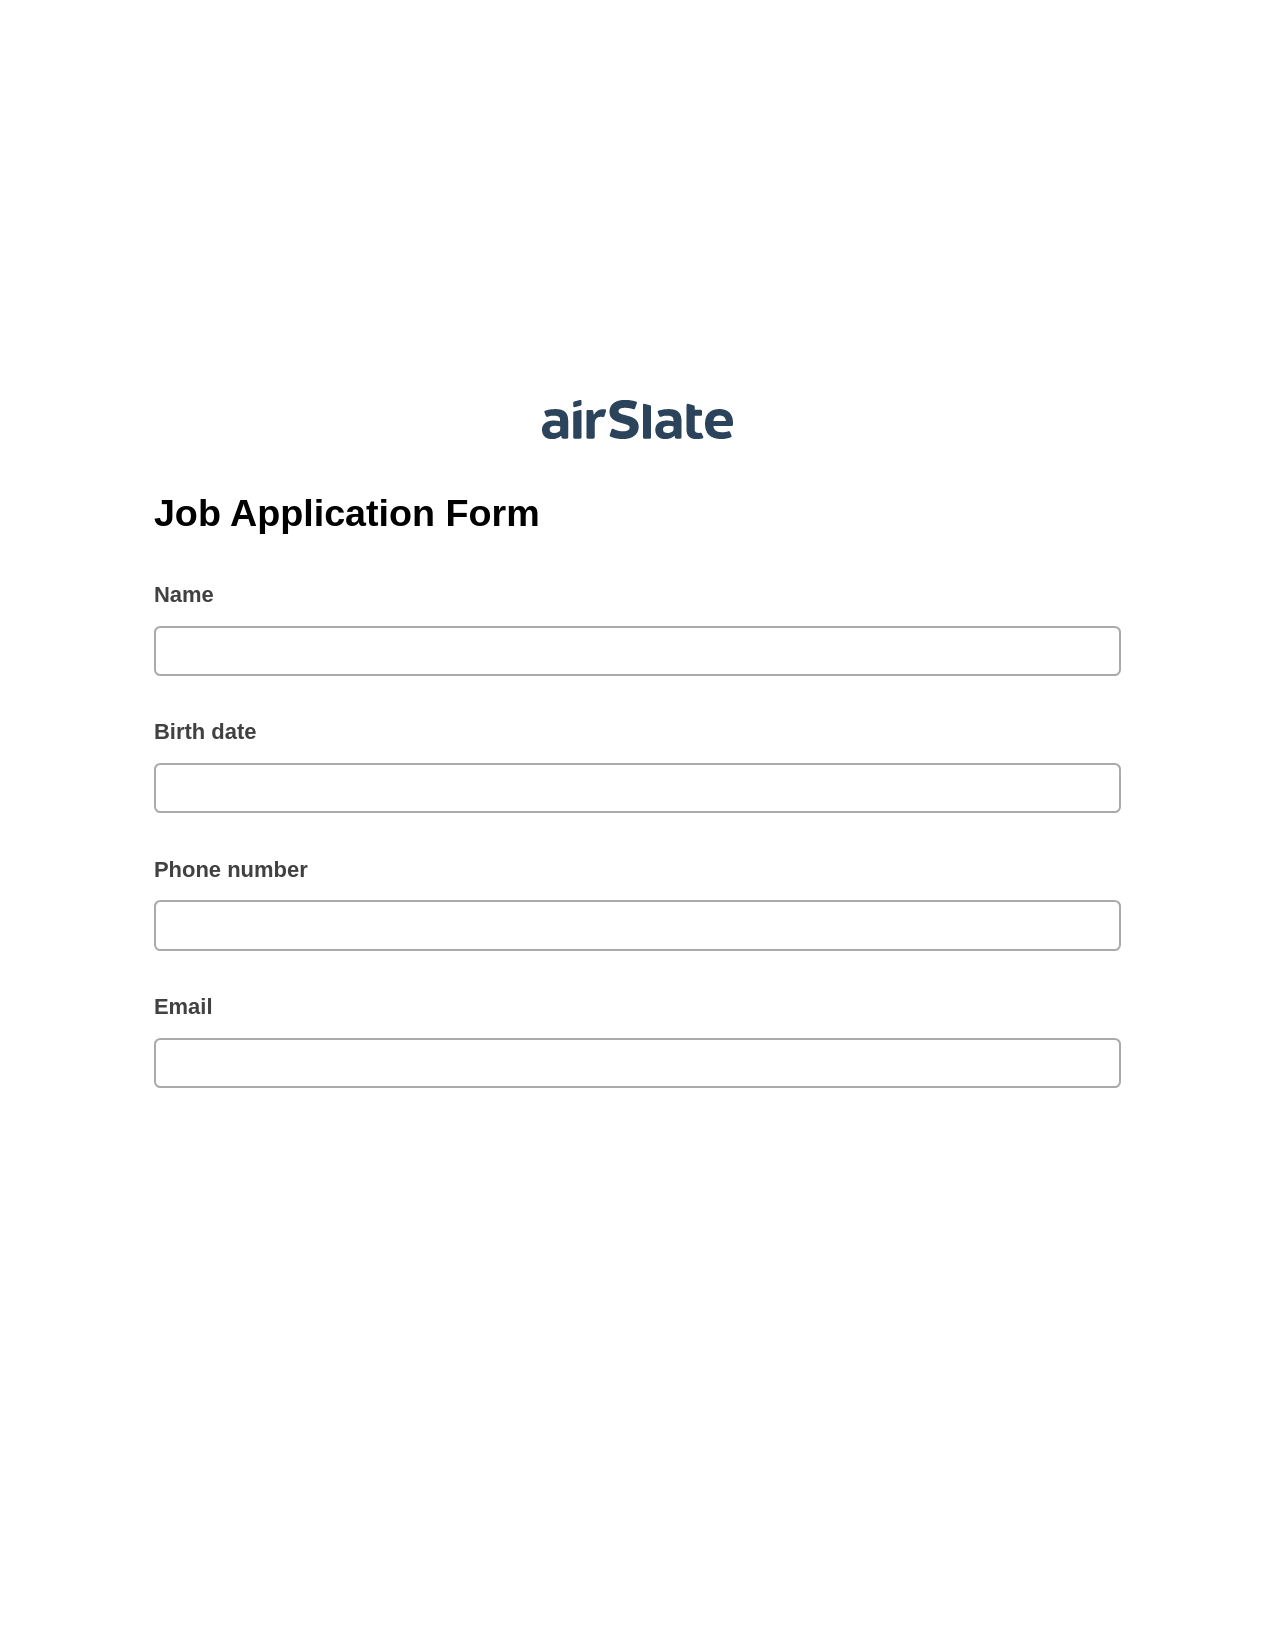 Multirole Job Application Form Pre-fill from NetSuite Records Bot, Pre-fill with Custom Data Bot, Box Bot